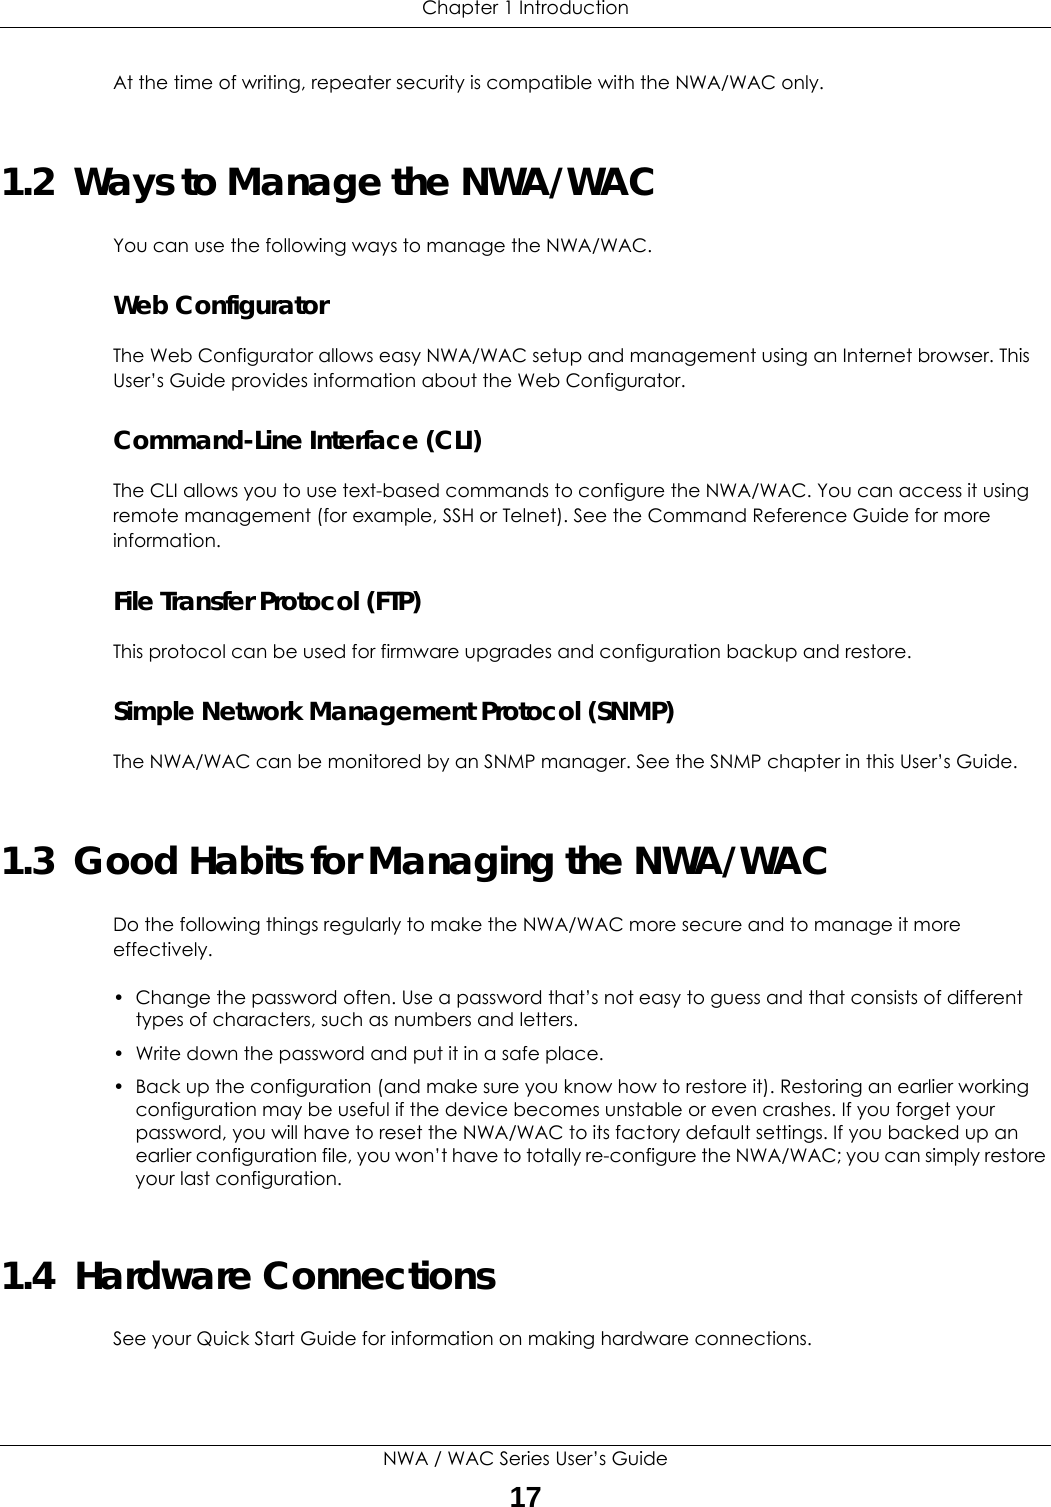 Chapter 1 IntroductionNWA / WAC Series User’s Guide17At the time of writing, repeater security is compatible with the NWA/WAC only. 1.2  Ways to Manage the NWA/WACYou can use the following ways to manage the NWA/WAC.Web ConfiguratorThe Web Configurator allows easy NWA/WAC setup and management using an Internet browser. This User’s Guide provides information about the Web Configurator.Command-Line Interface (CLI)The CLI allows you to use text-based commands to configure the NWA/WAC. You can access it using remote management (for example, SSH or Telnet). See the Command Reference Guide for more information.File Transfer Protocol (FTP)This protocol can be used for firmware upgrades and configuration backup and restore.Simple Network Management Protocol (SNMP)The NWA/WAC can be monitored by an SNMP manager. See the SNMP chapter in this User’s Guide.1.3  Good Habits for Managing the NWA/WACDo the following things regularly to make the NWA/WAC more secure and to manage it more effectively.• Change the password often. Use a password that’s not easy to guess and that consists of different types of characters, such as numbers and letters.• Write down the password and put it in a safe place.• Back up the configuration (and make sure you know how to restore it). Restoring an earlier working configuration may be useful if the device becomes unstable or even crashes. If you forget your password, you will have to reset the NWA/WAC to its factory default settings. If you backed up an earlier configuration file, you won’t have to totally re-configure the NWA/WAC; you can simply restore your last configuration.1.4  Hardware ConnectionsSee your Quick Start Guide for information on making hardware connections.